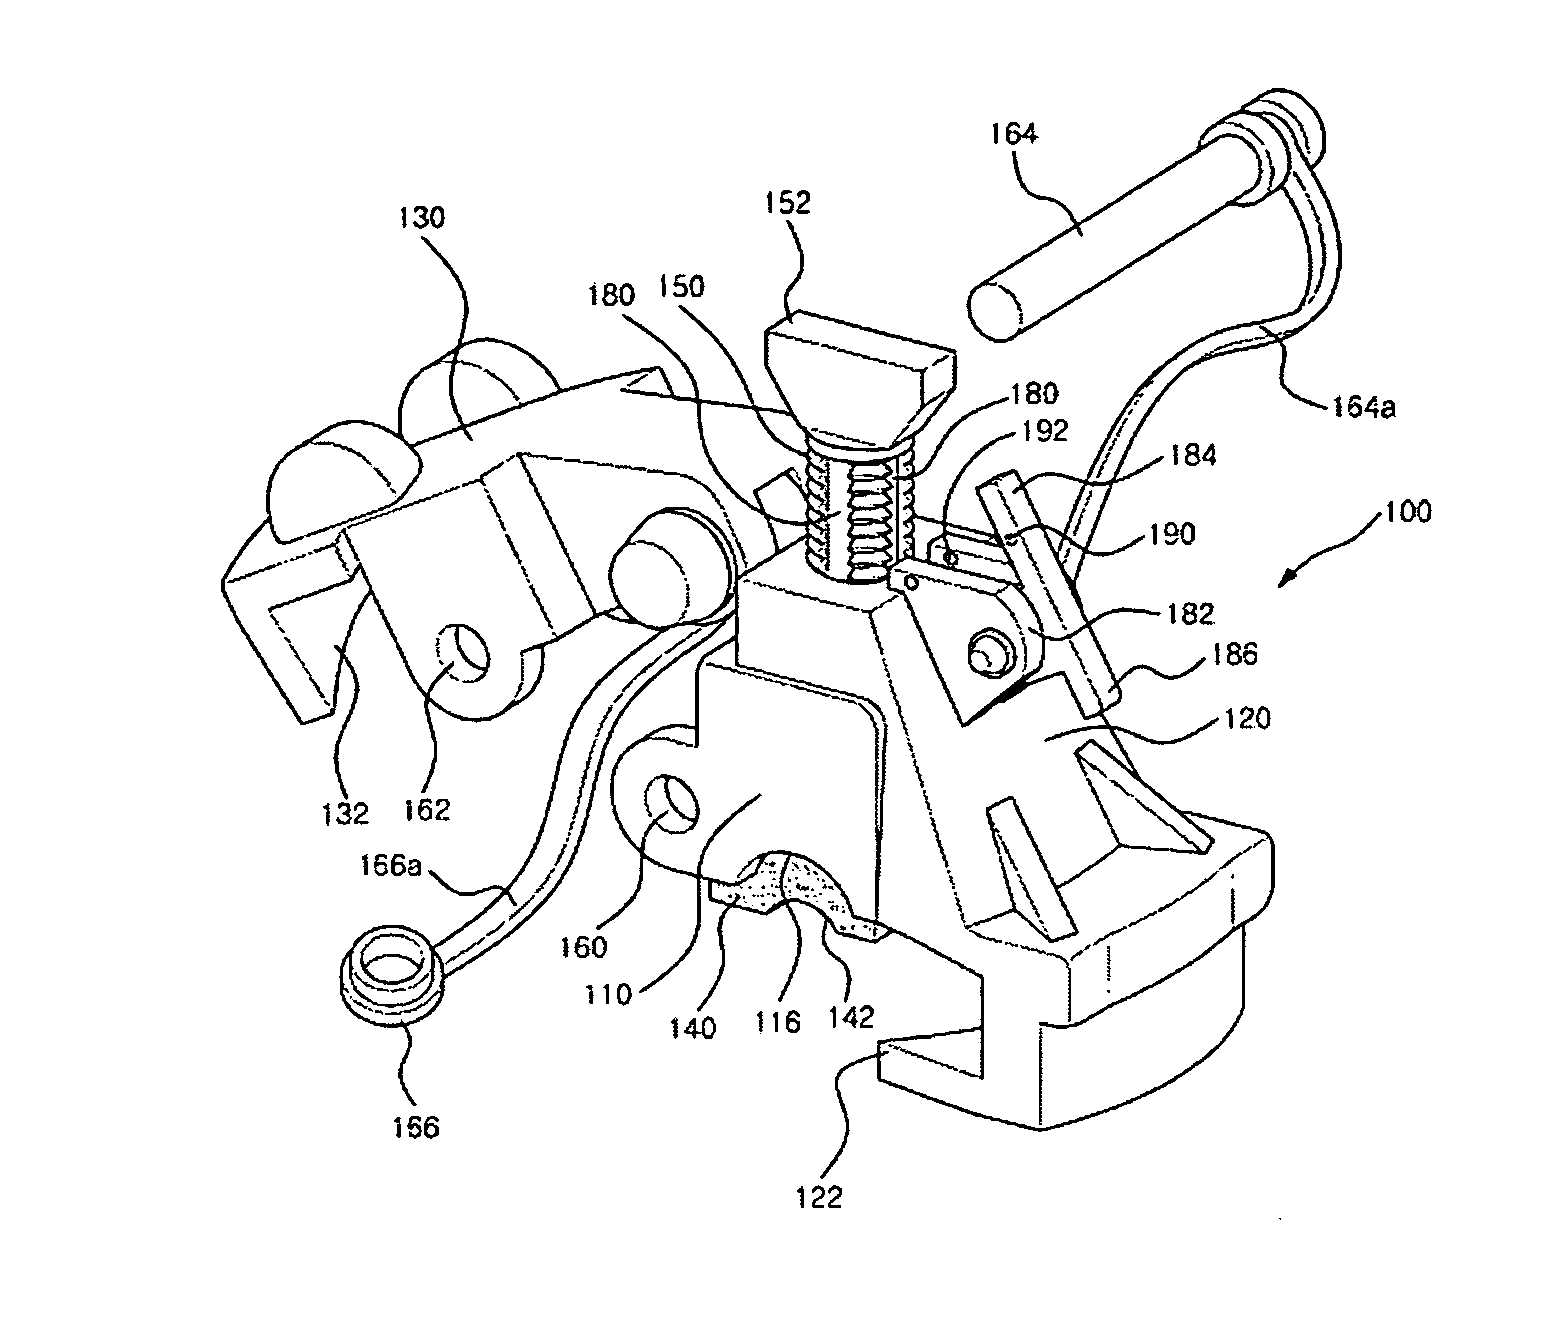 Electric power cable fixing apparatus for an insulator